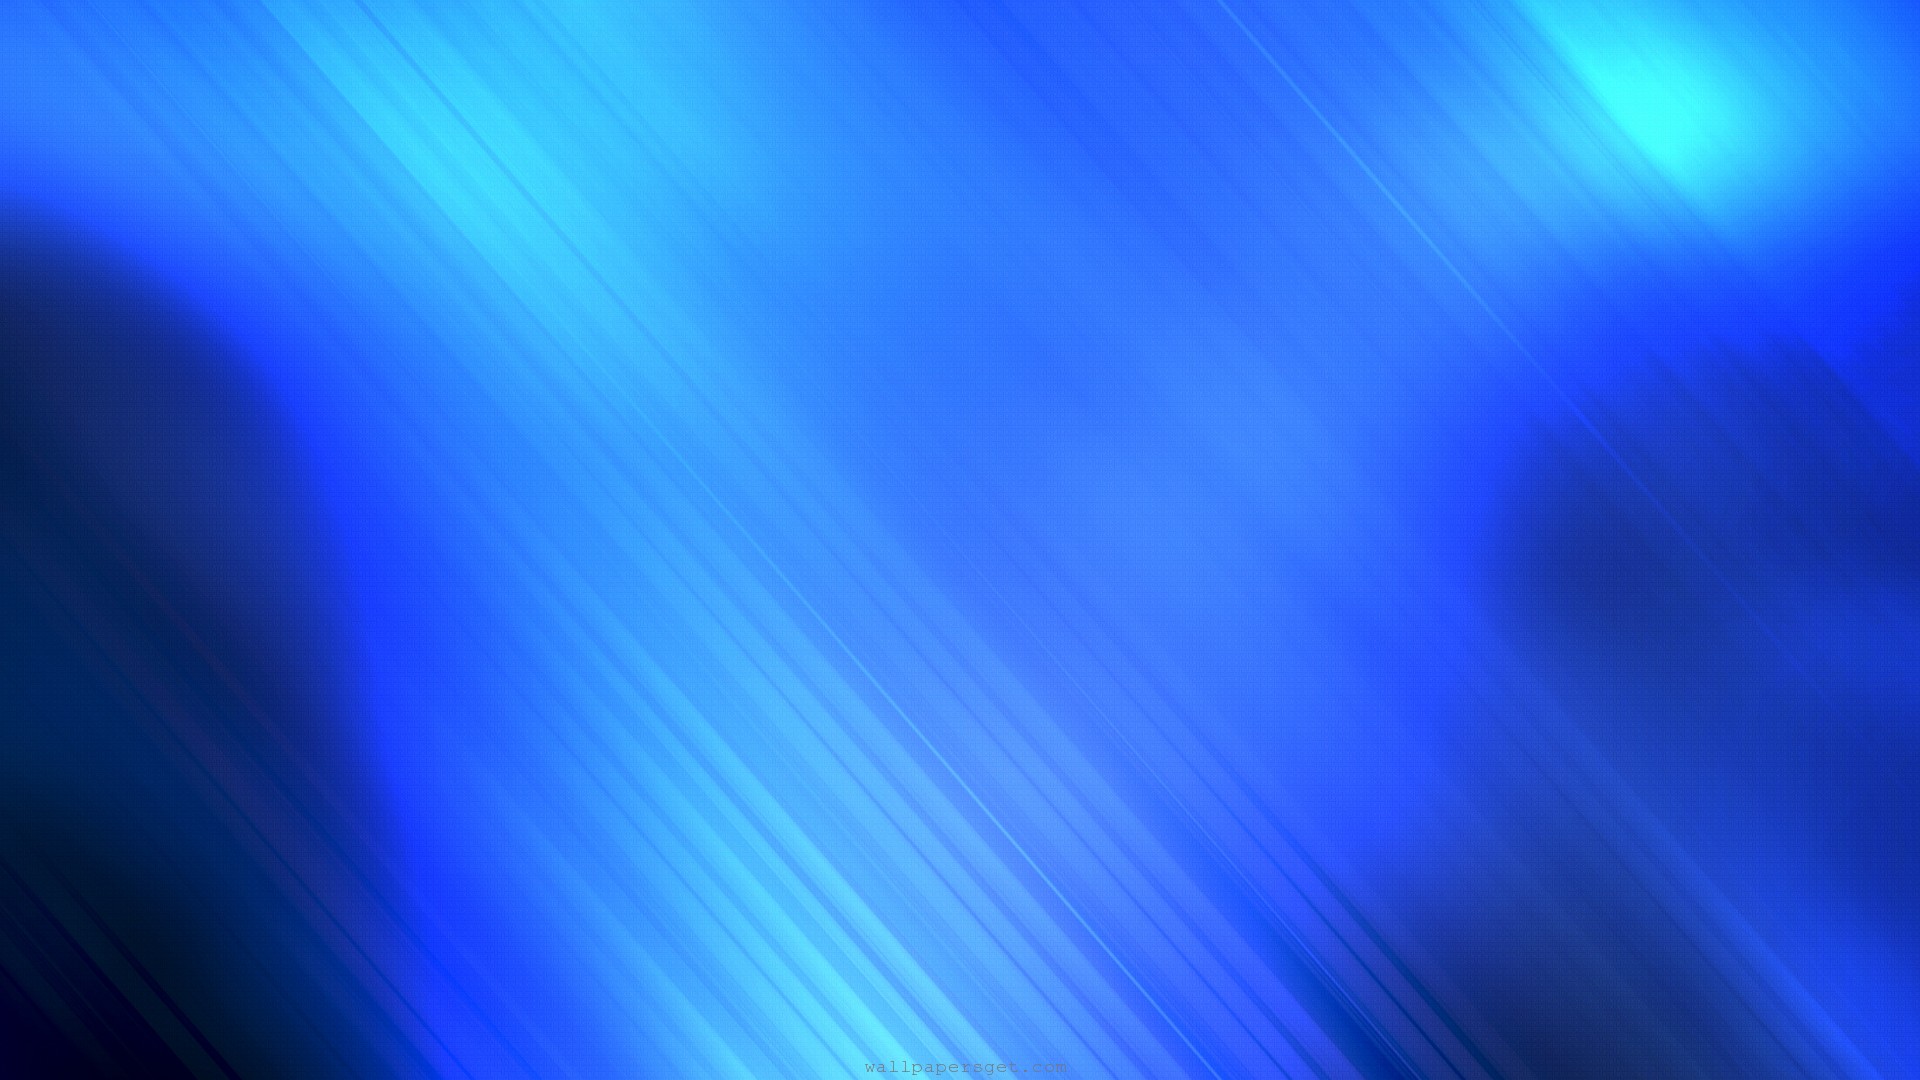 Hd blue background wallpapers